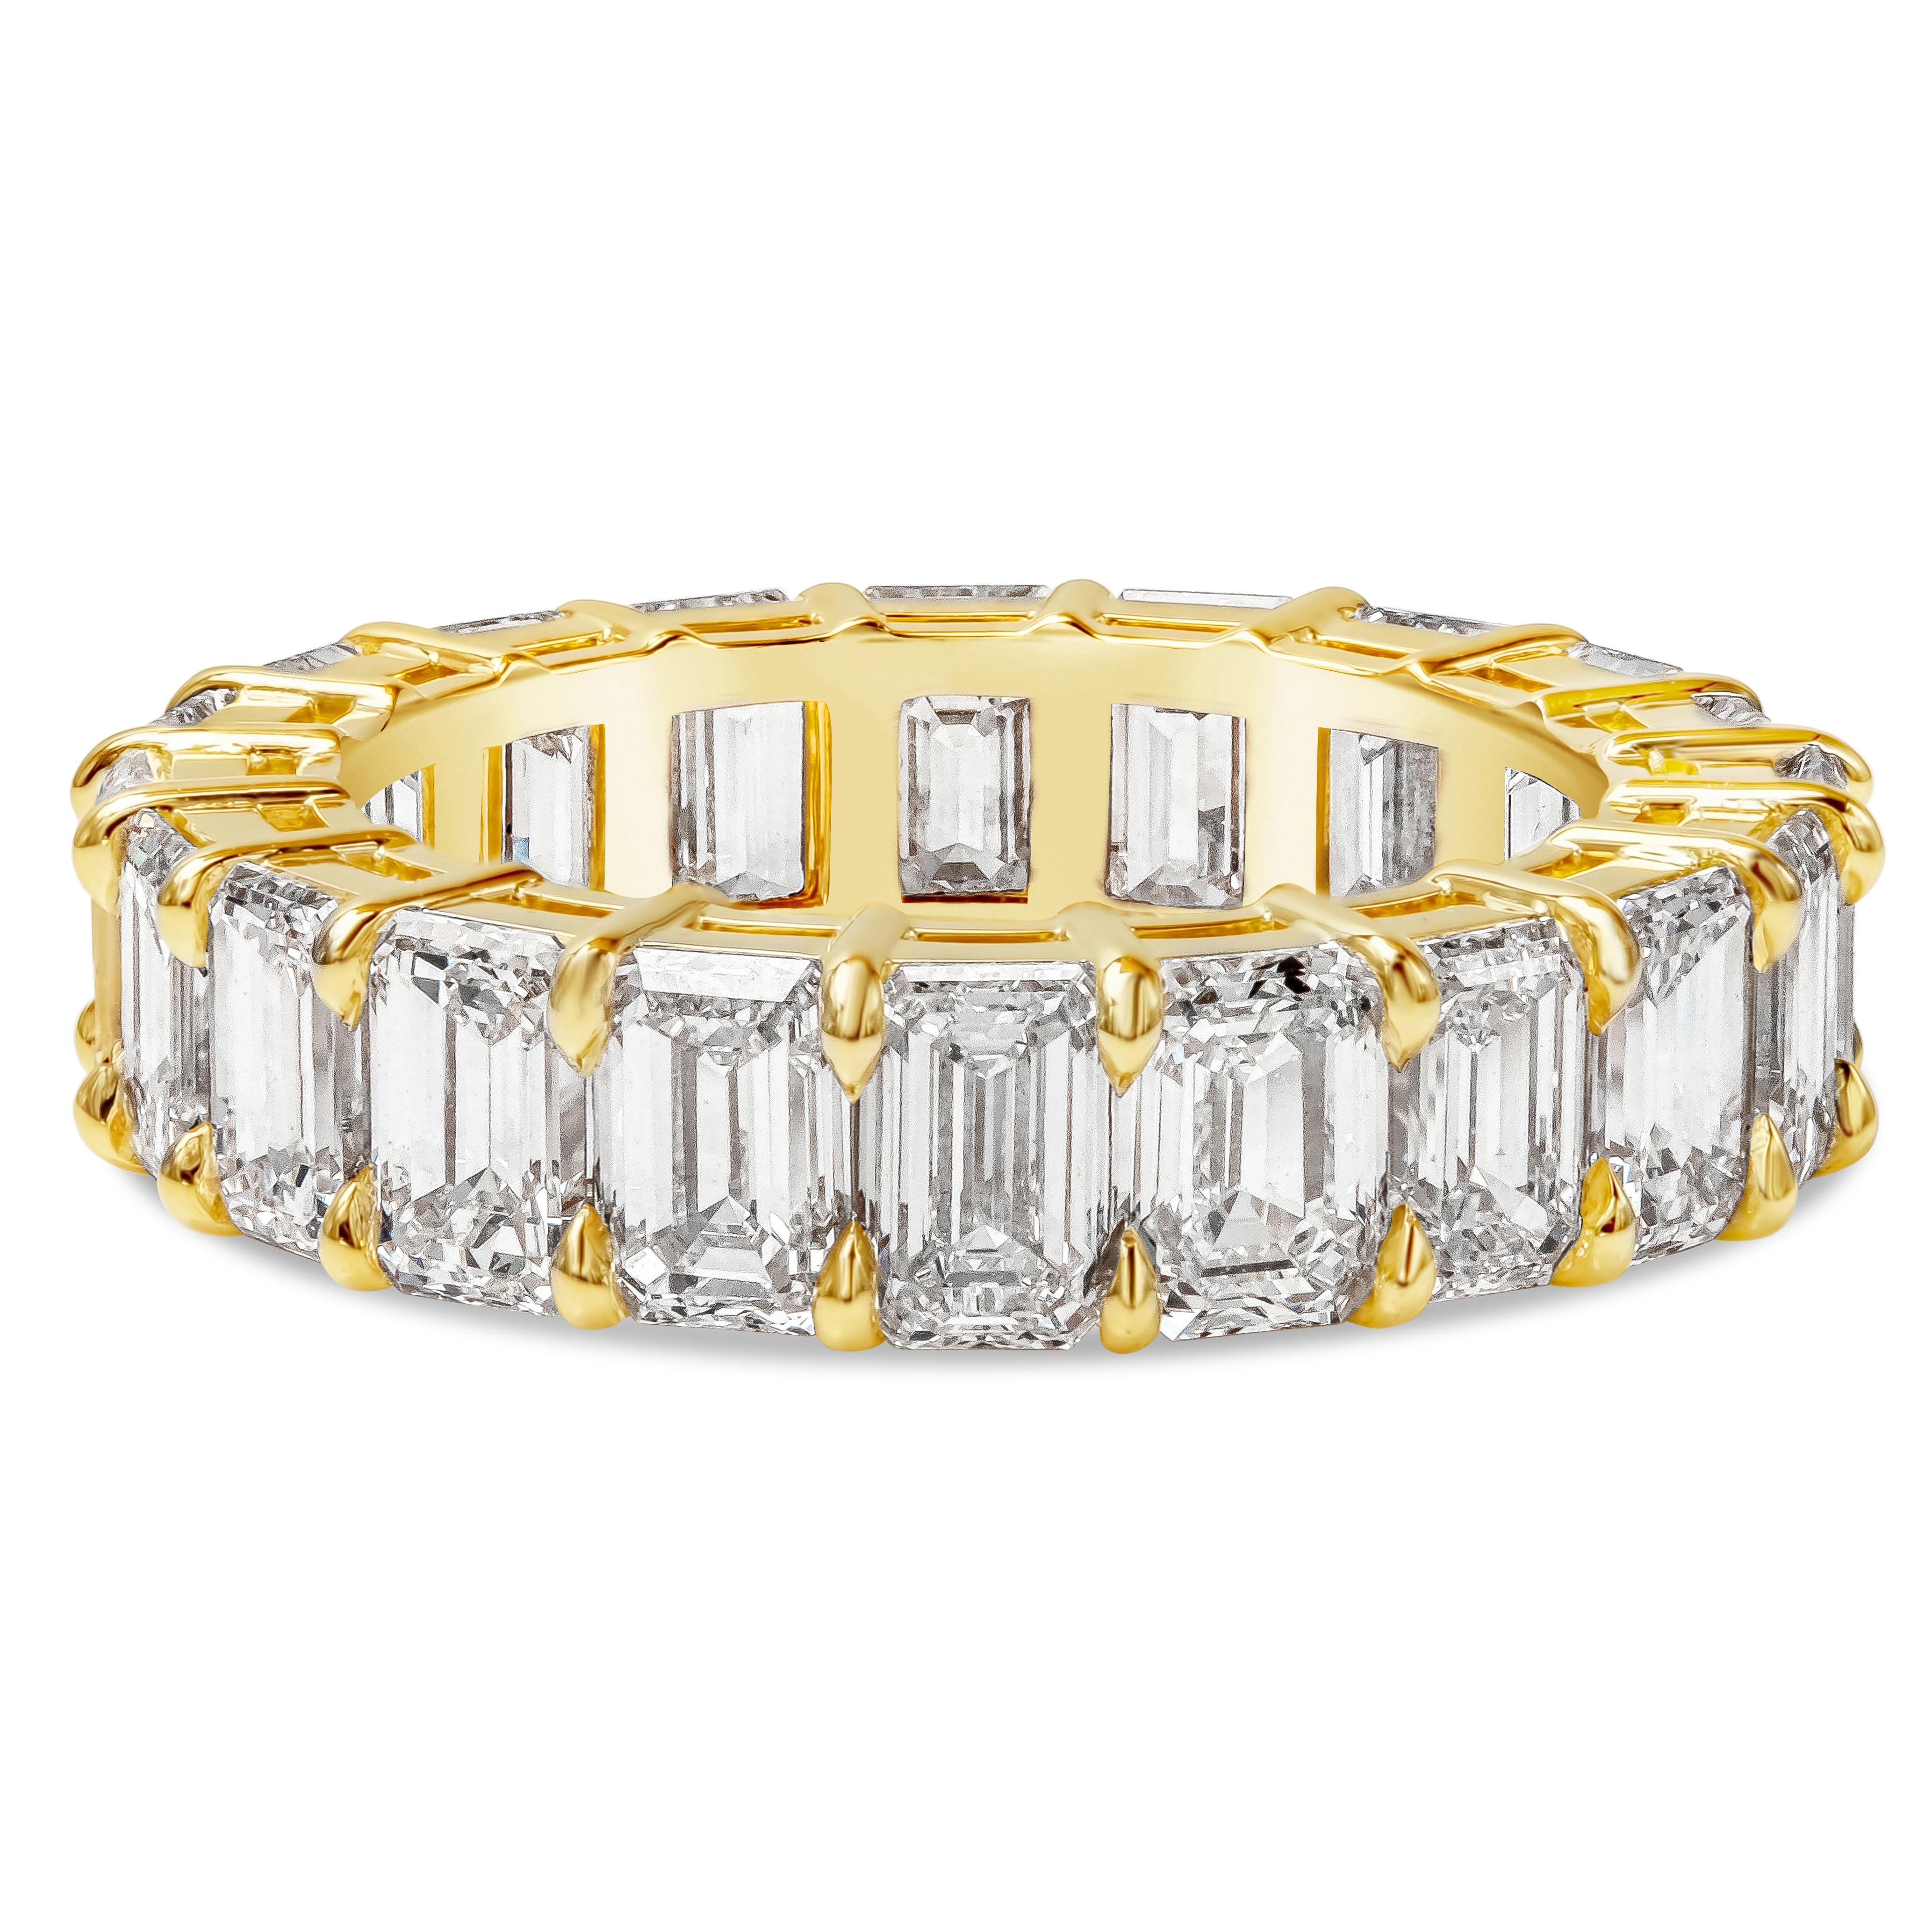 A classic eternity wedding band style showcasing a row of emerald cut diamonds weighing 8.03 carats total, G-H Color and VS in Clarity, set in a timeless shared prong setting. Made in 18K Yellow Gold, size 6.5 US.

Roman Malakov is a custom house,